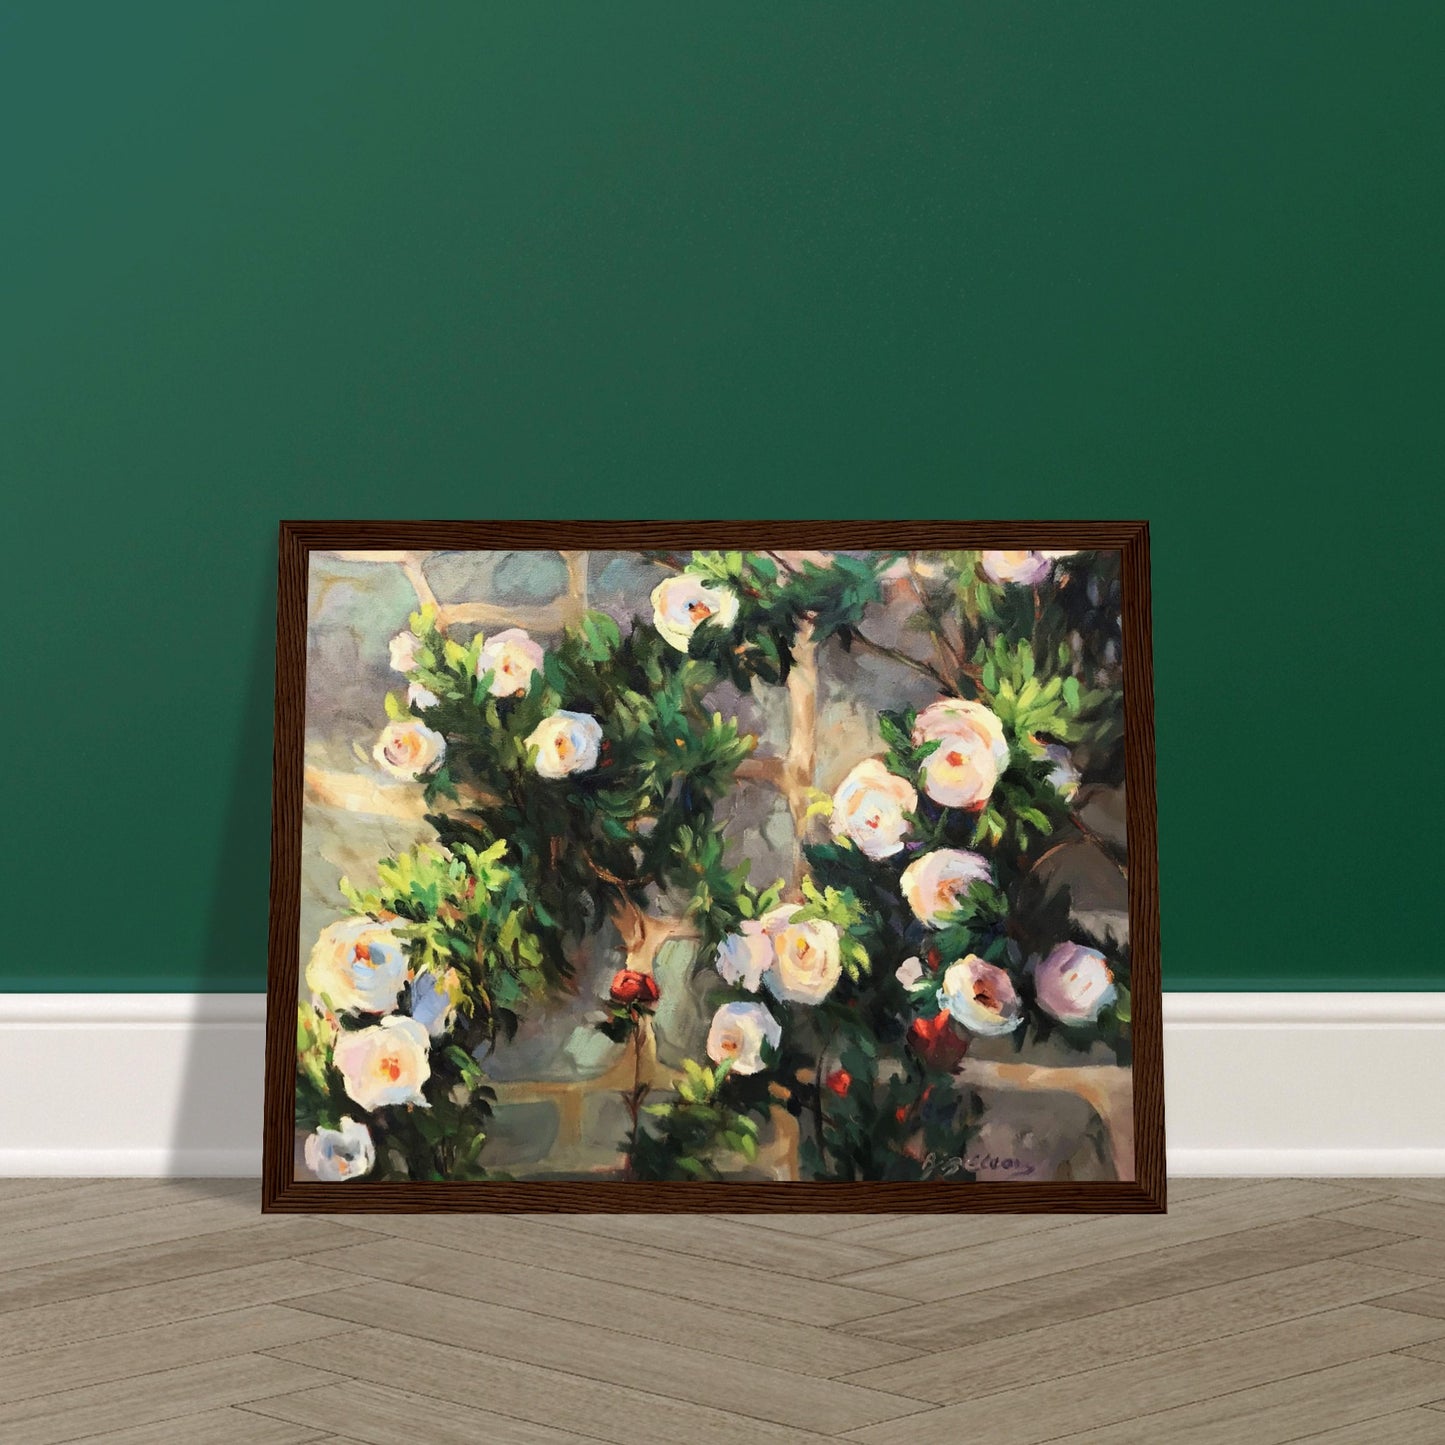 "Vining Roses" Wooden Framed 12x16 Art Print by Barbara Cleary Designs